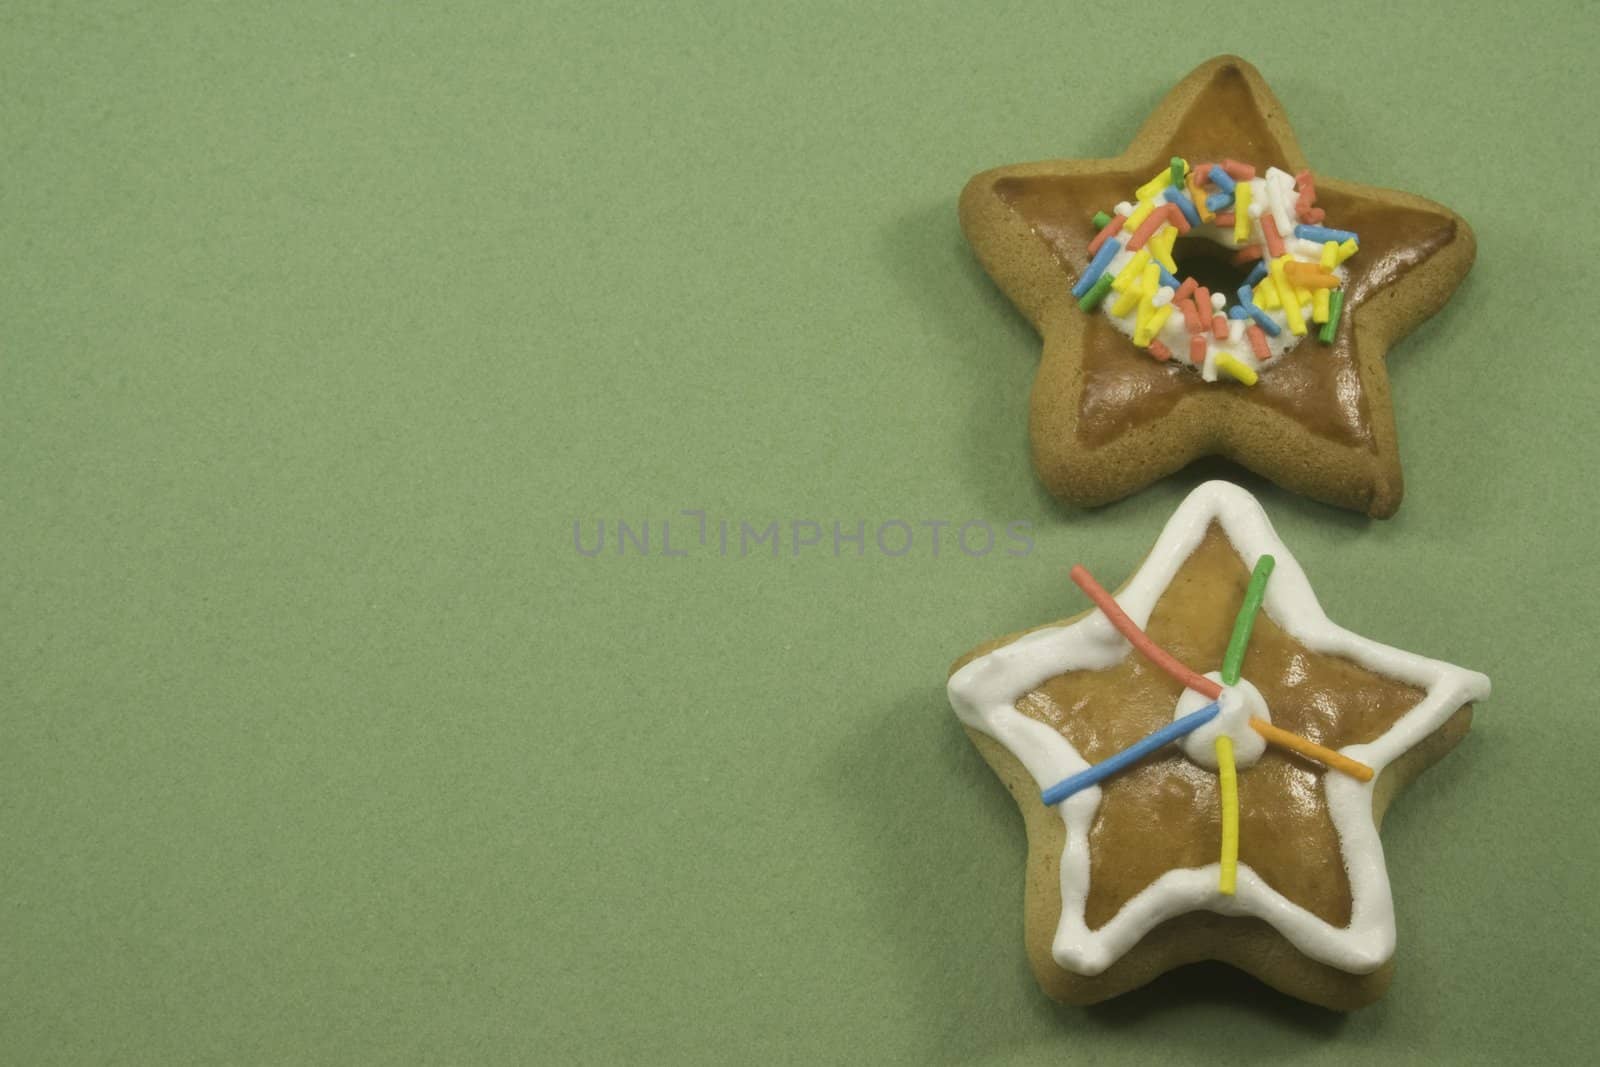 Two star Christmas cookies on green paper with copyspace on left